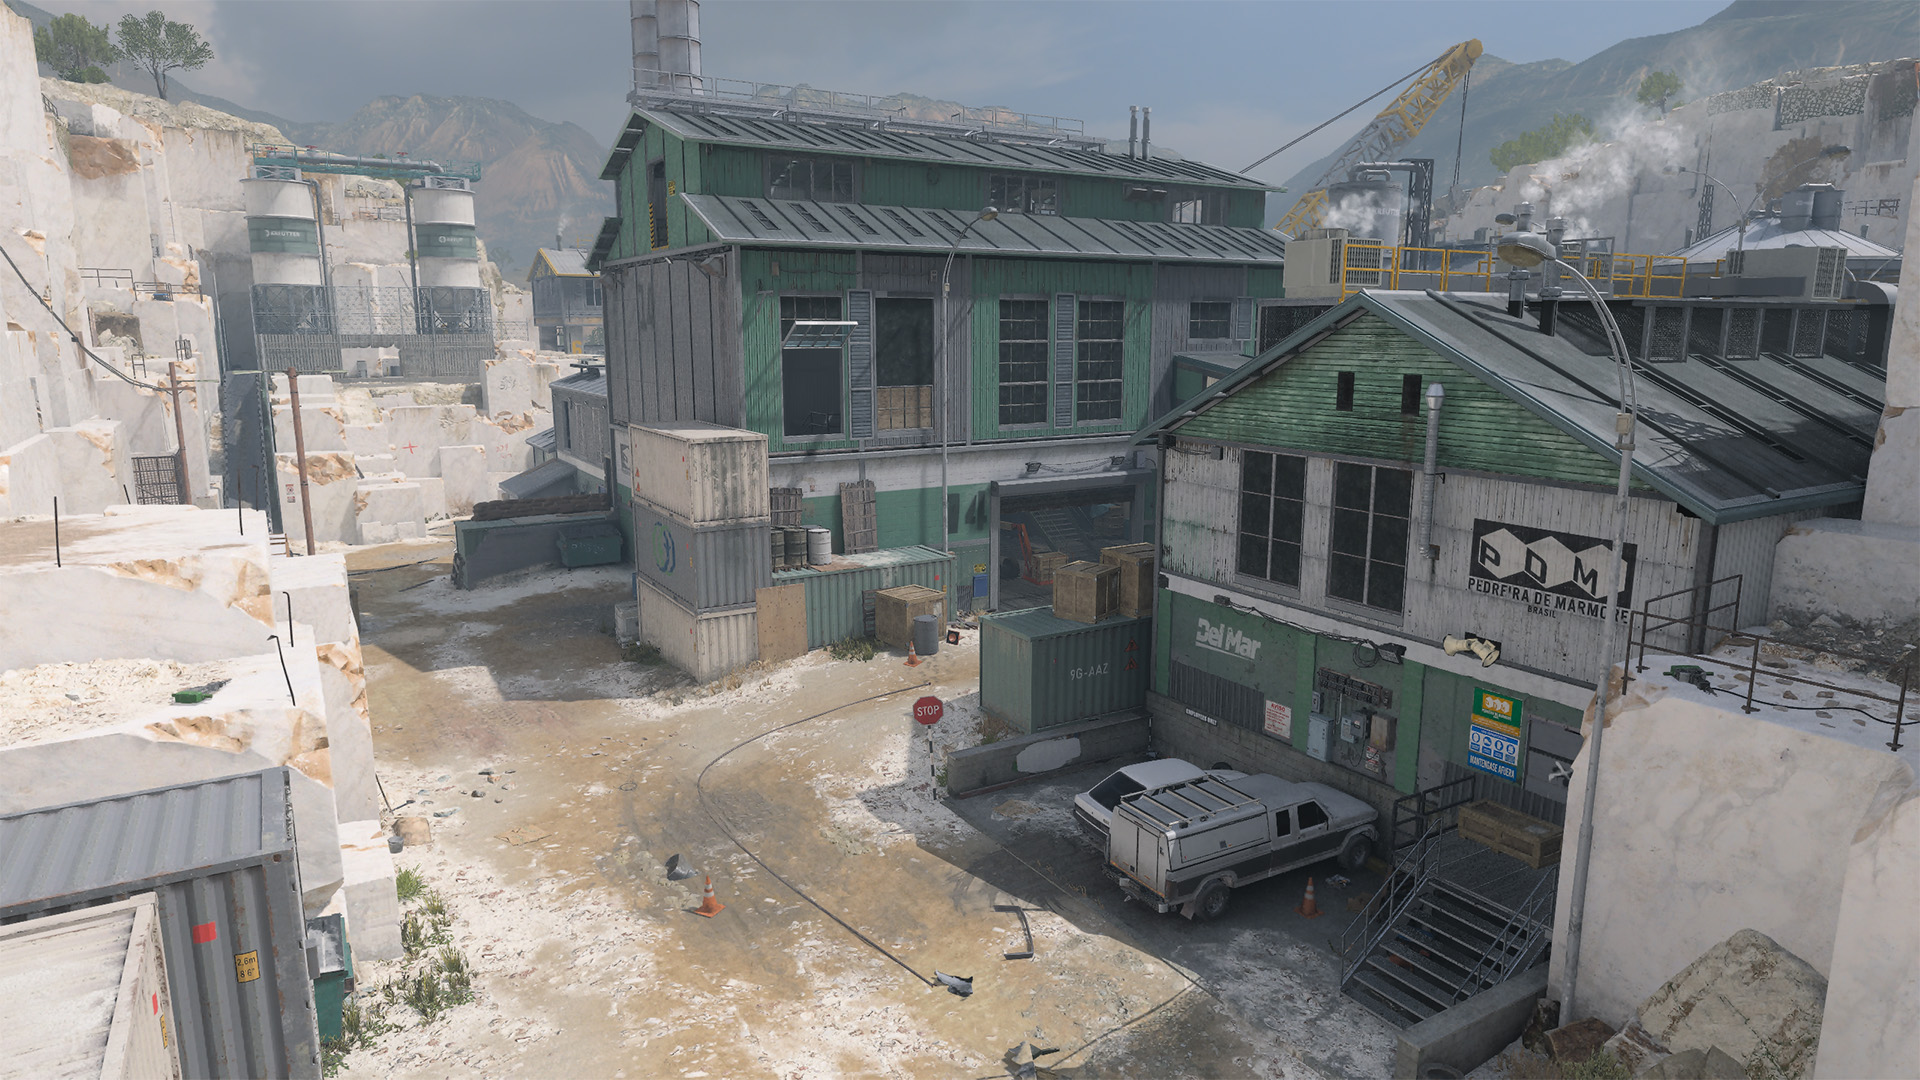 Call of Duty: Modern Warfare 2 (Full Game) - Multiplayer Map: Quarry - HD  720p 